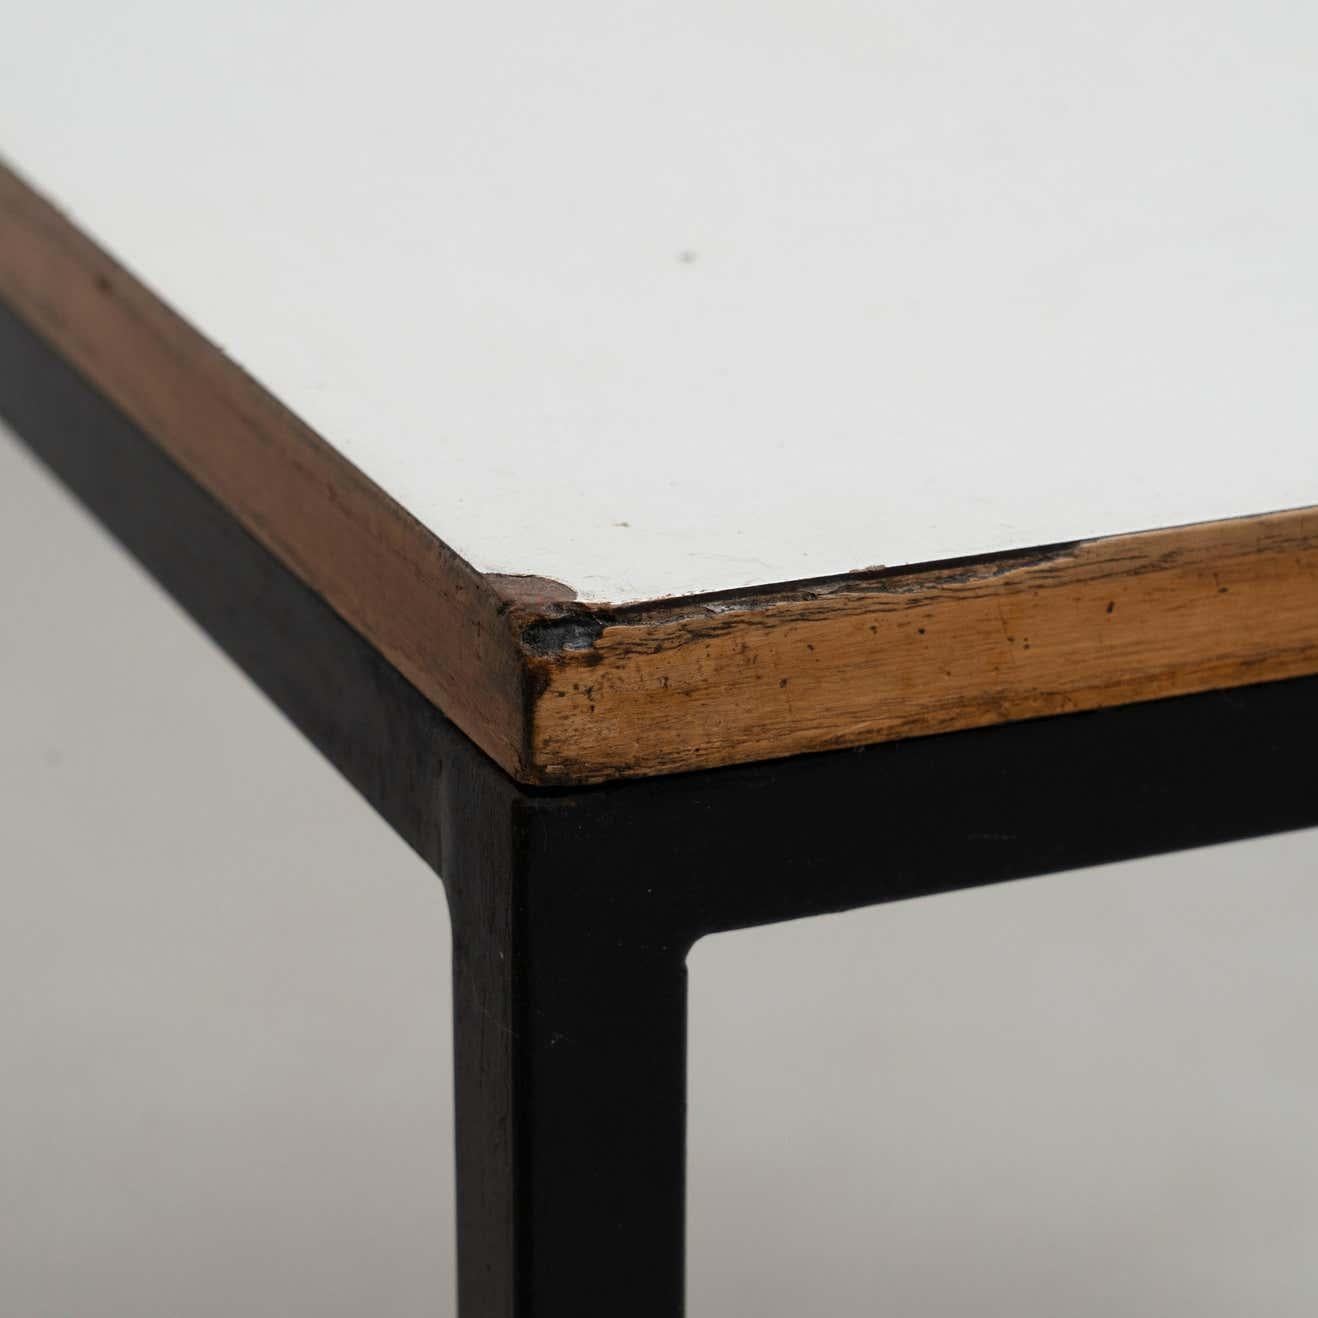 Mid-20th Century Charlotte Perriand Metal, Wood and Formica Table for Cansado, circa 1950 For Sale